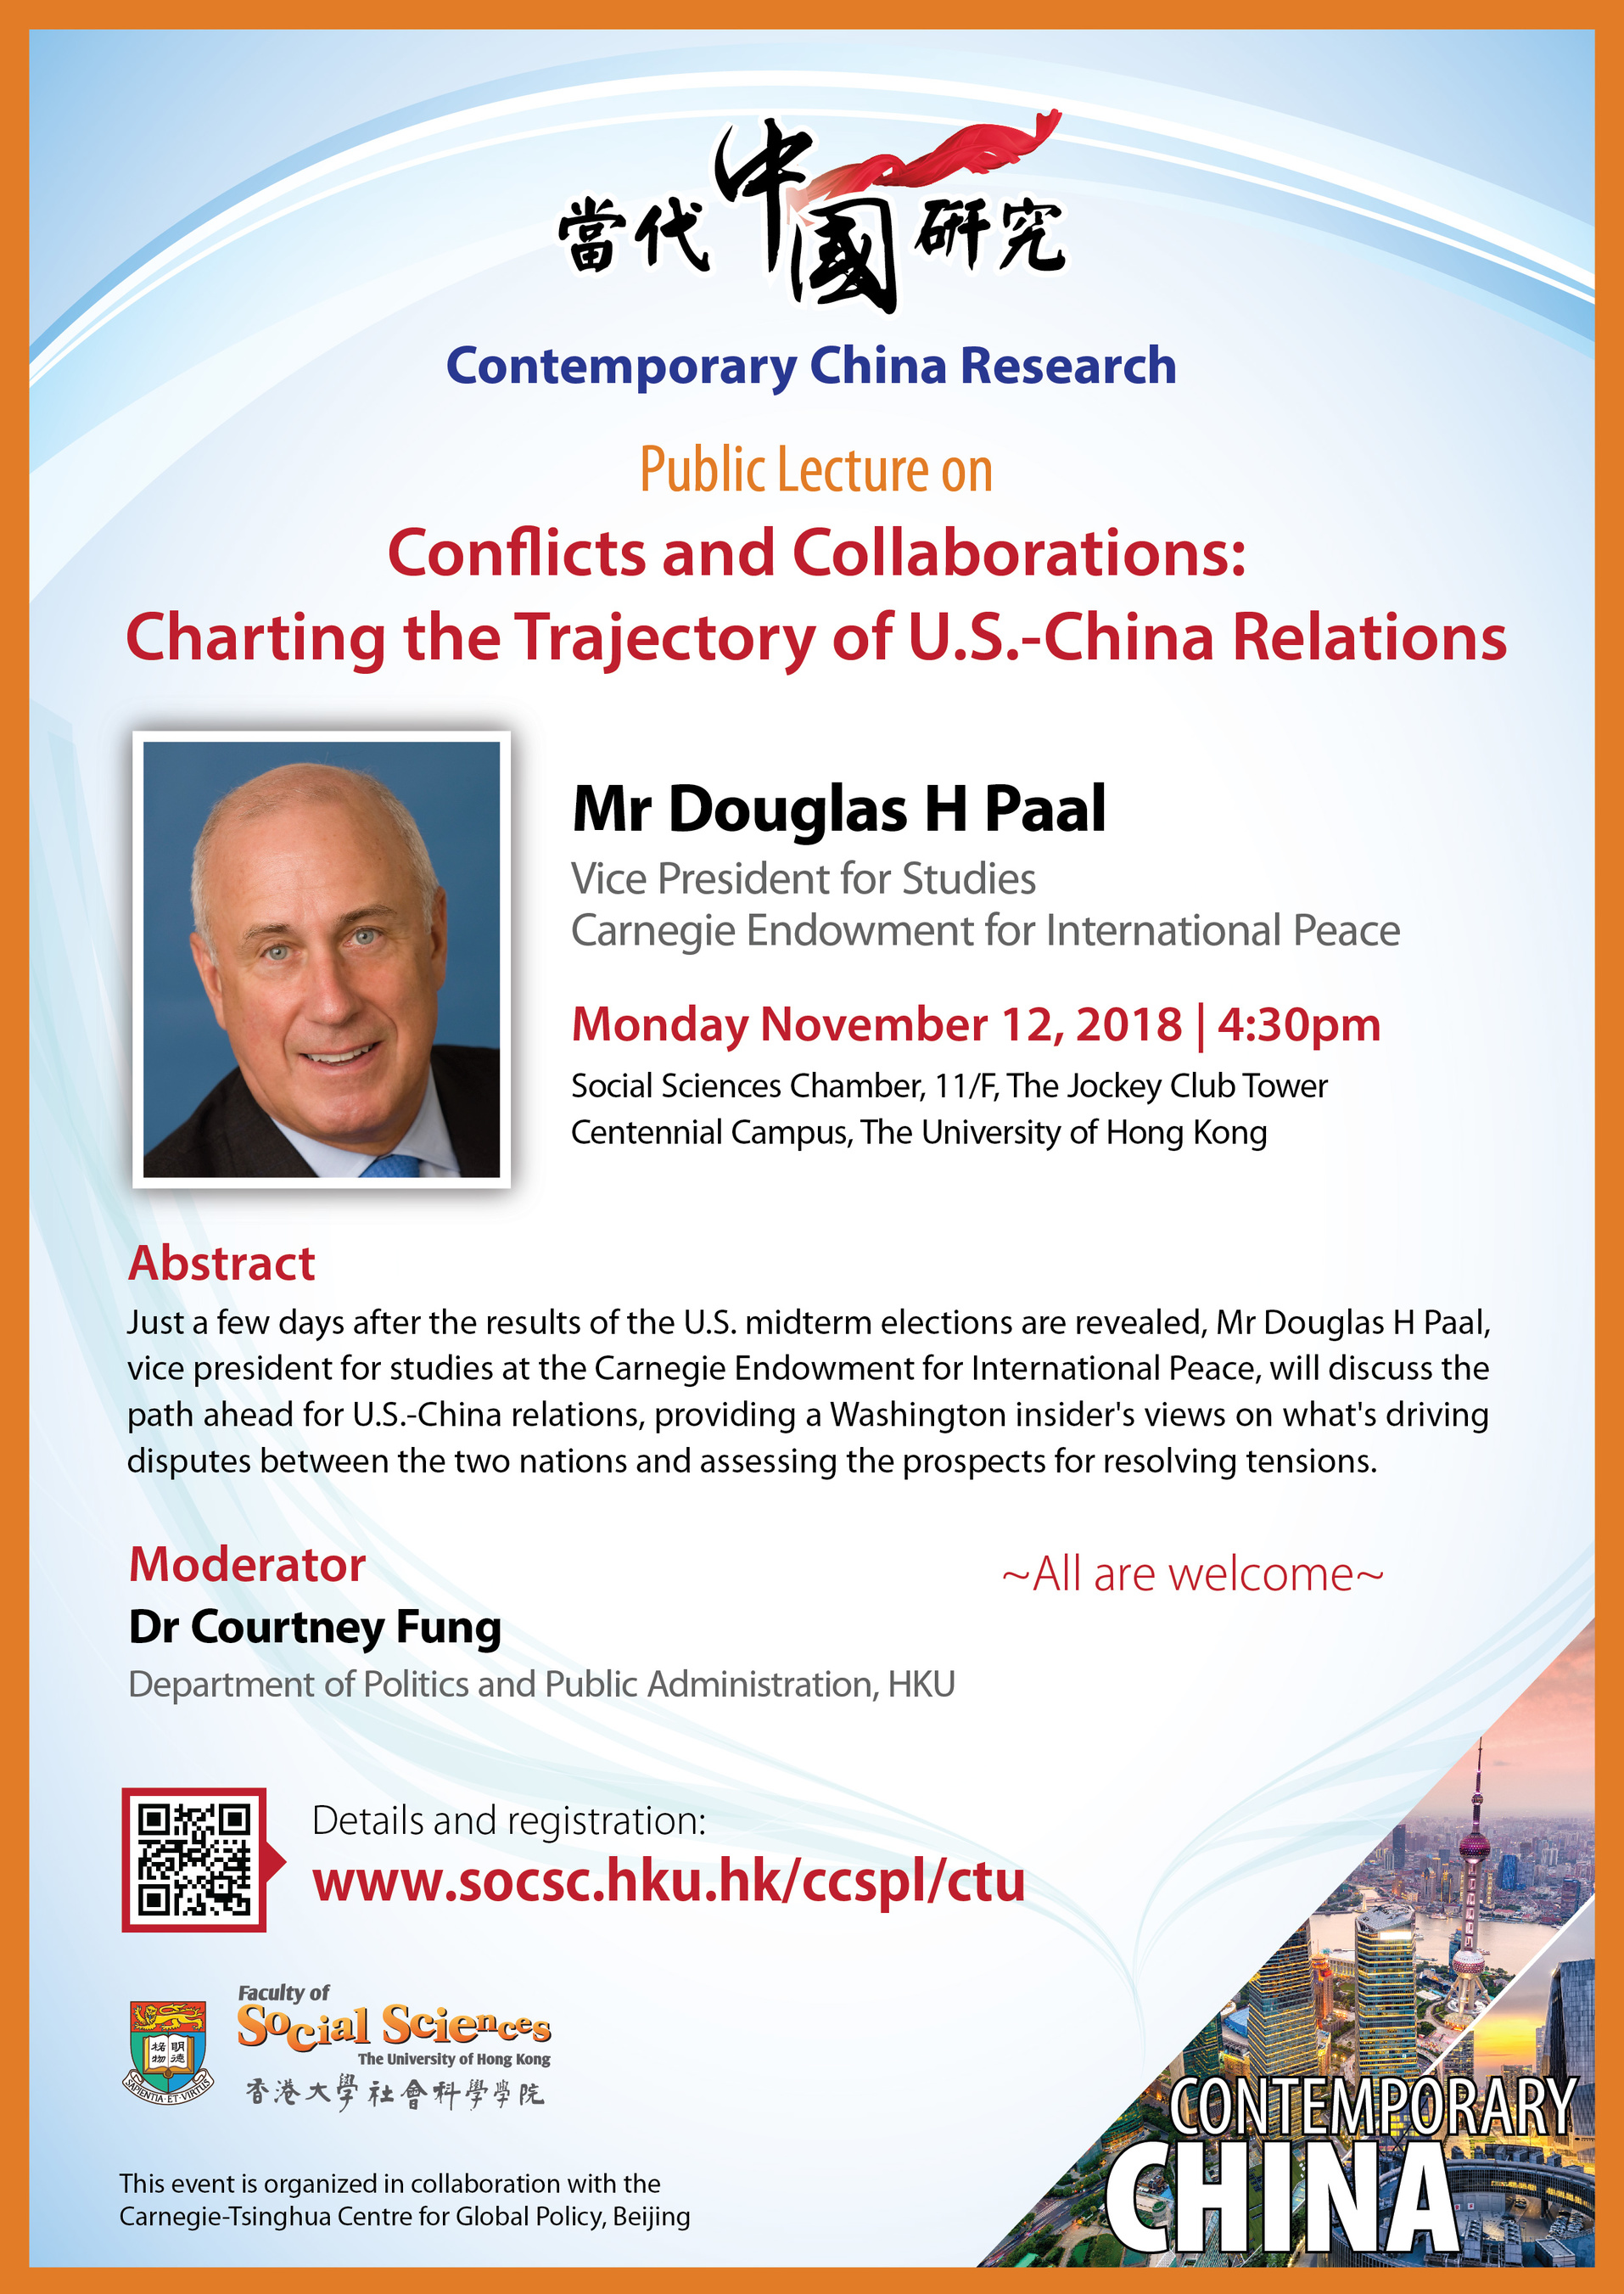 Contemporary China Research Public Lecture on Conflicts and Collaborations: Charting the Trajectory of U.S.-China Relations